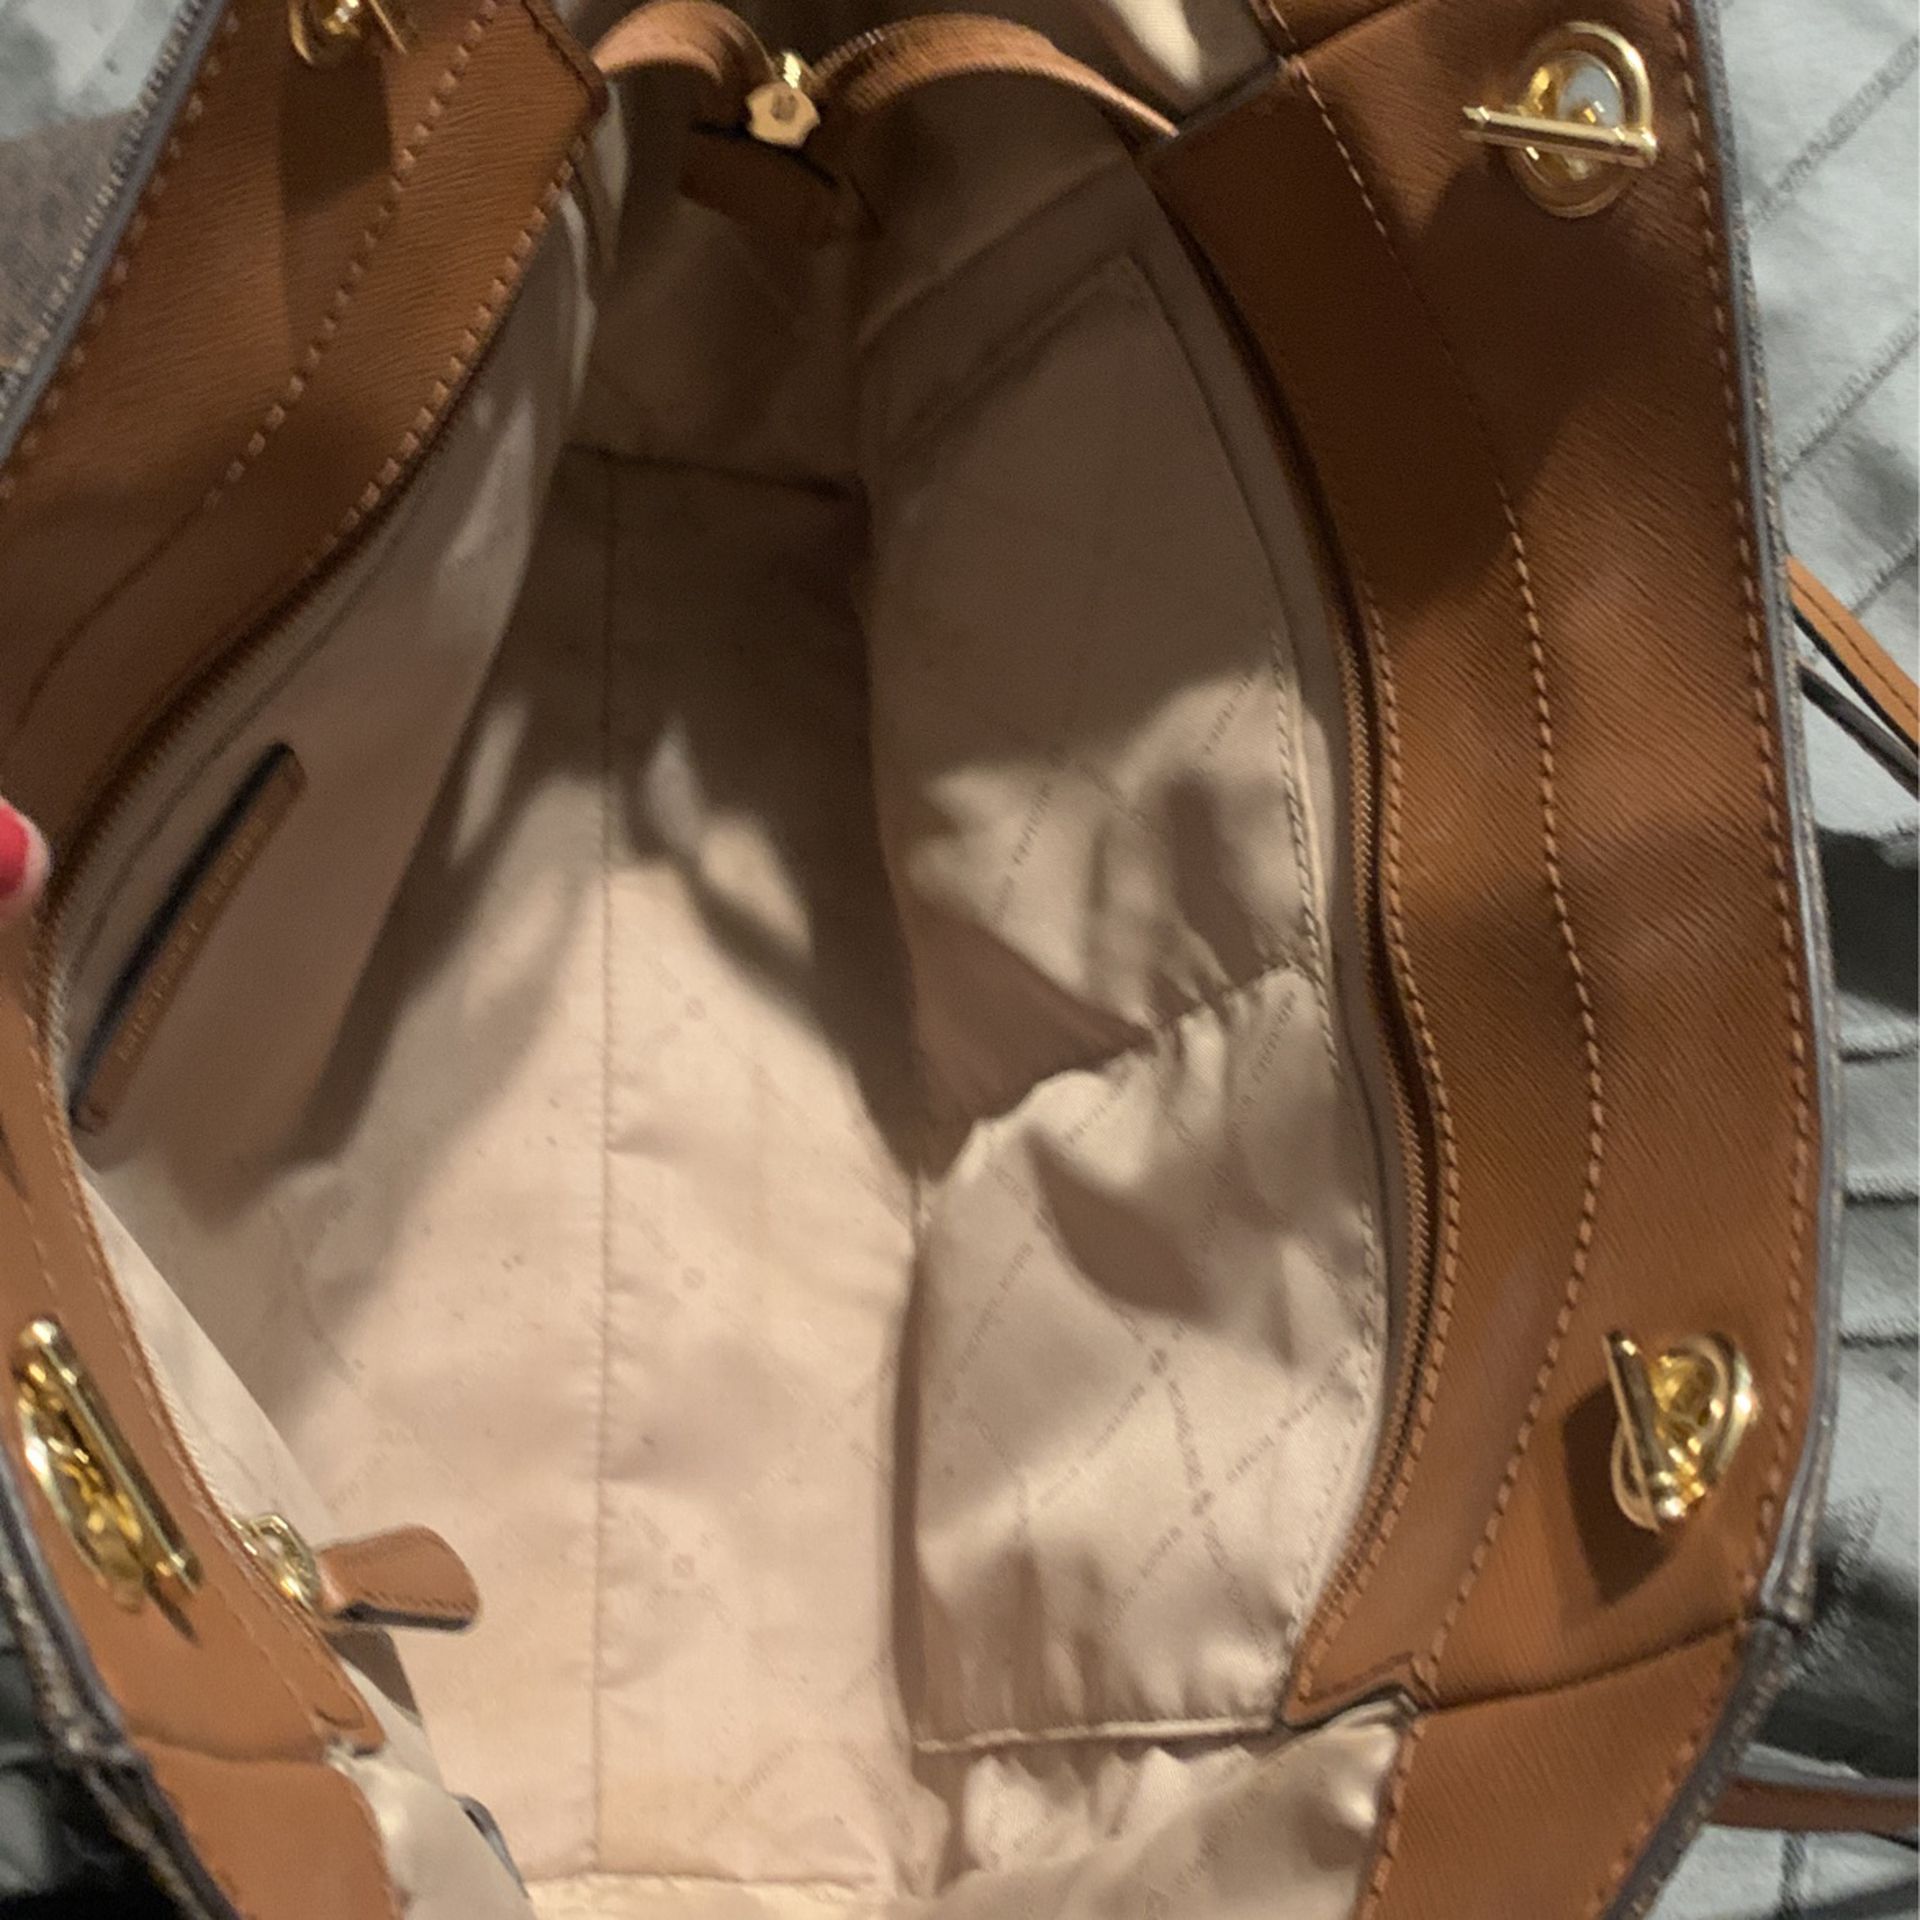 Michael Kors Kenly Tote And Wallet for Sale in Townsend, MA - OfferUp